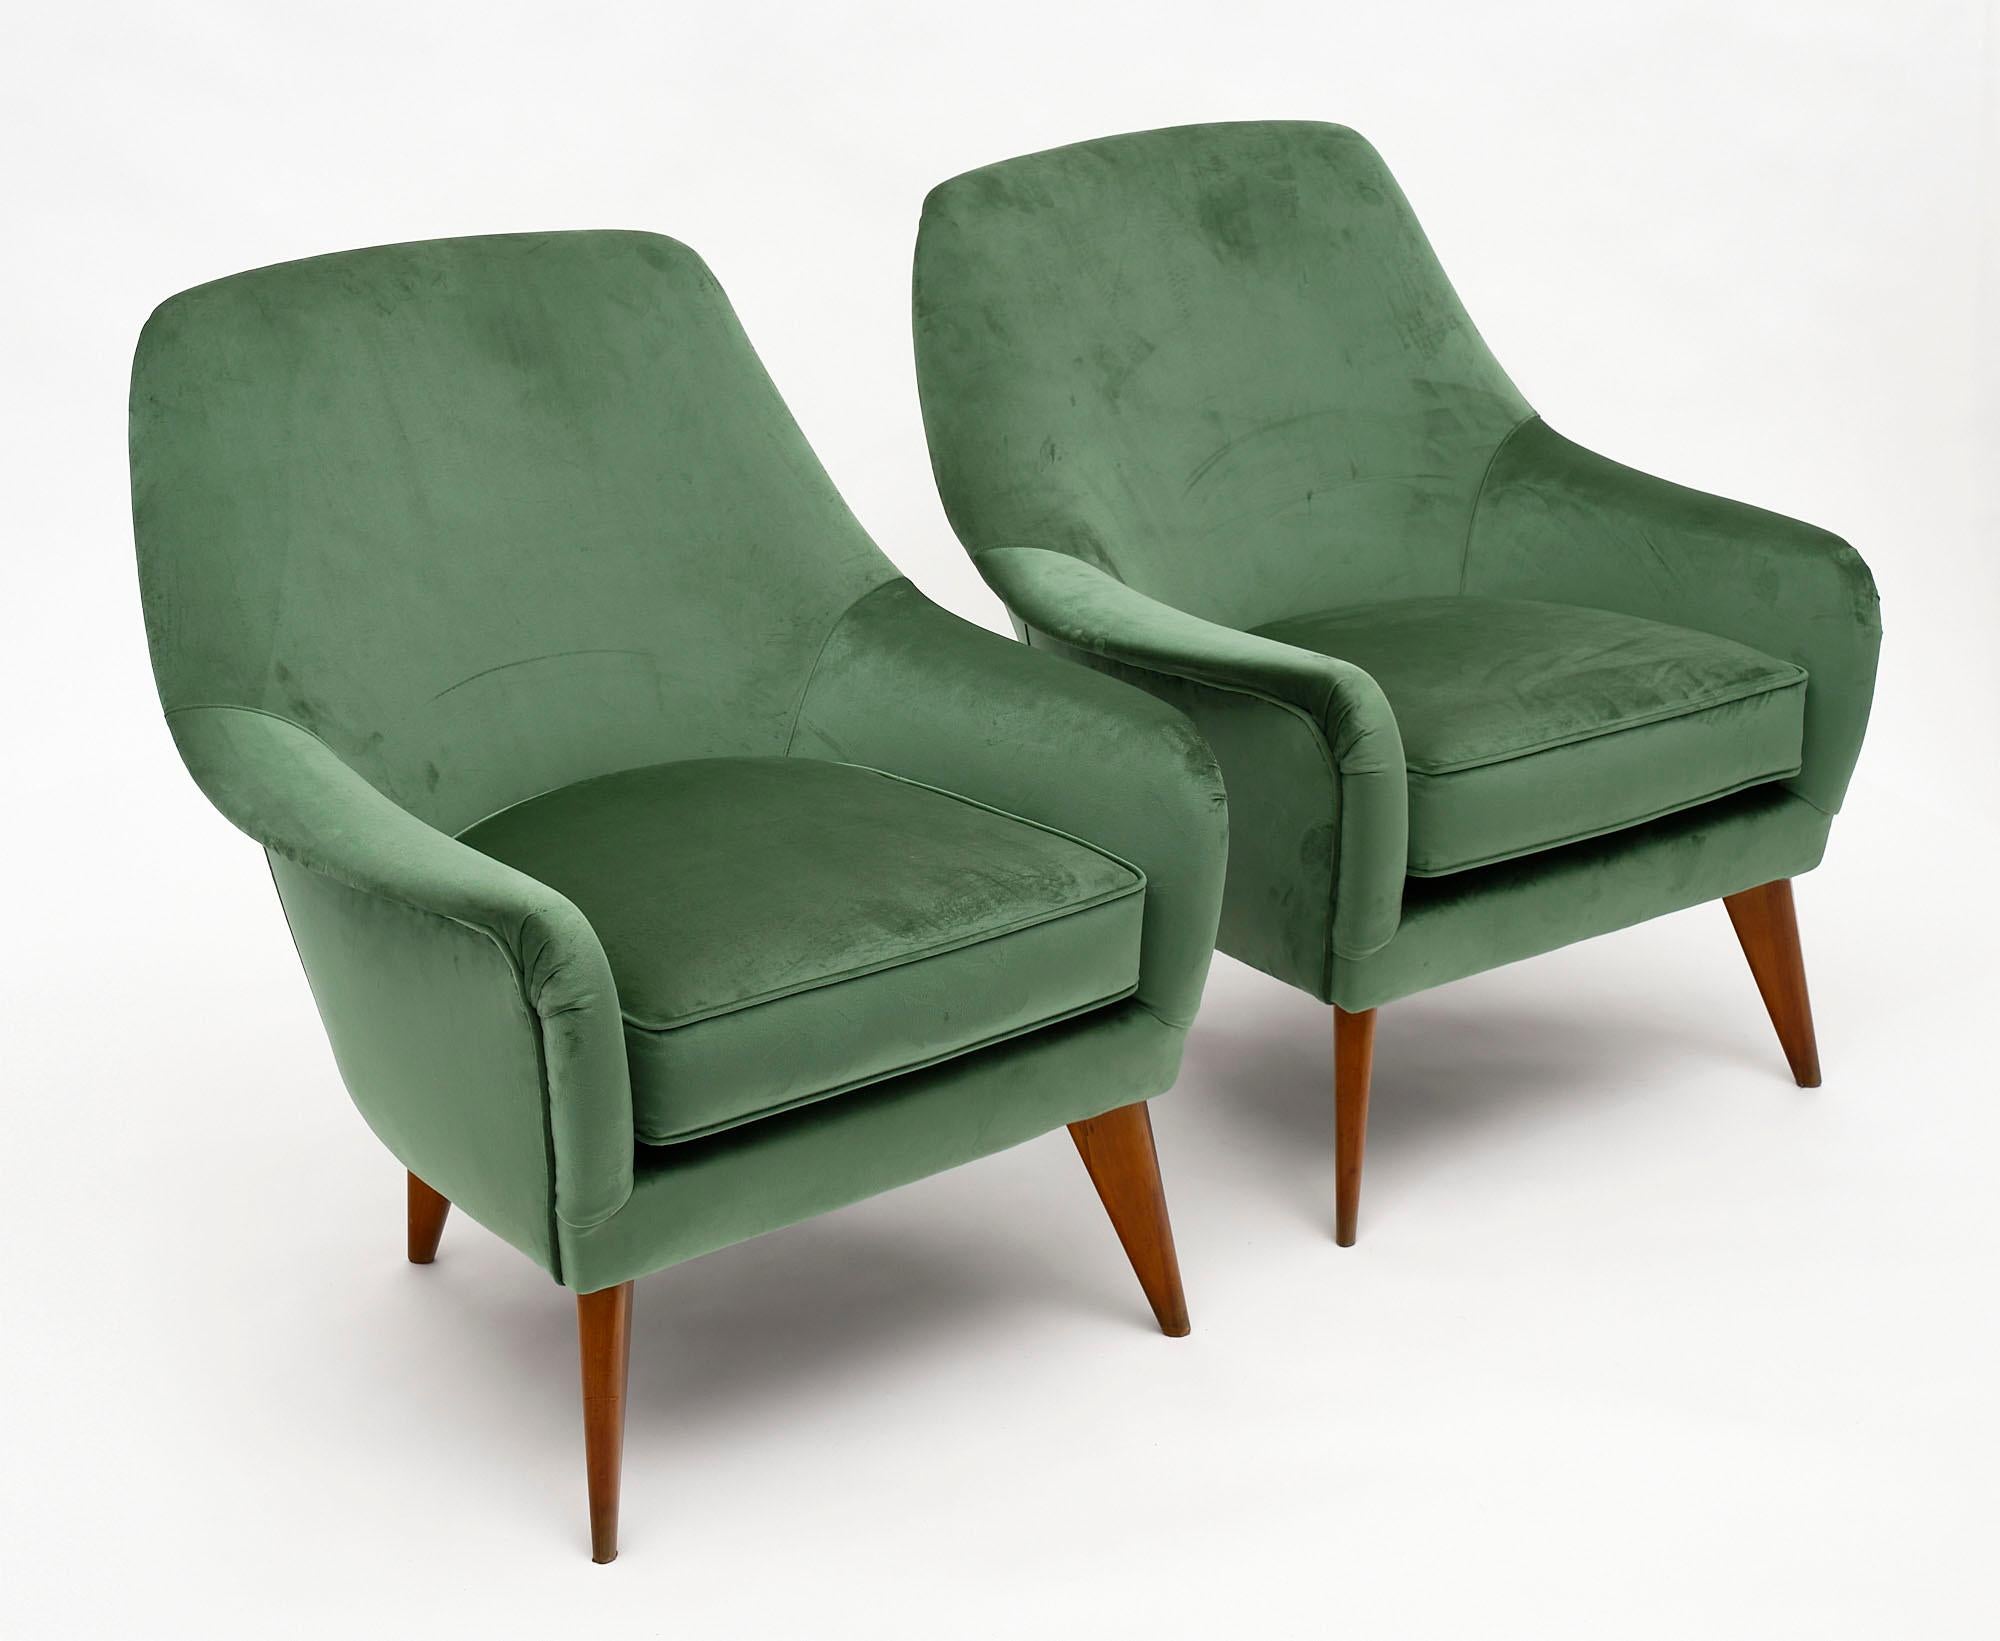 Pair of Italian green velvet armchairs from Verona. This comfortable pair has been newly upholstered in a soft velvet. We love the solid wood frame with flared cherry wood legs.